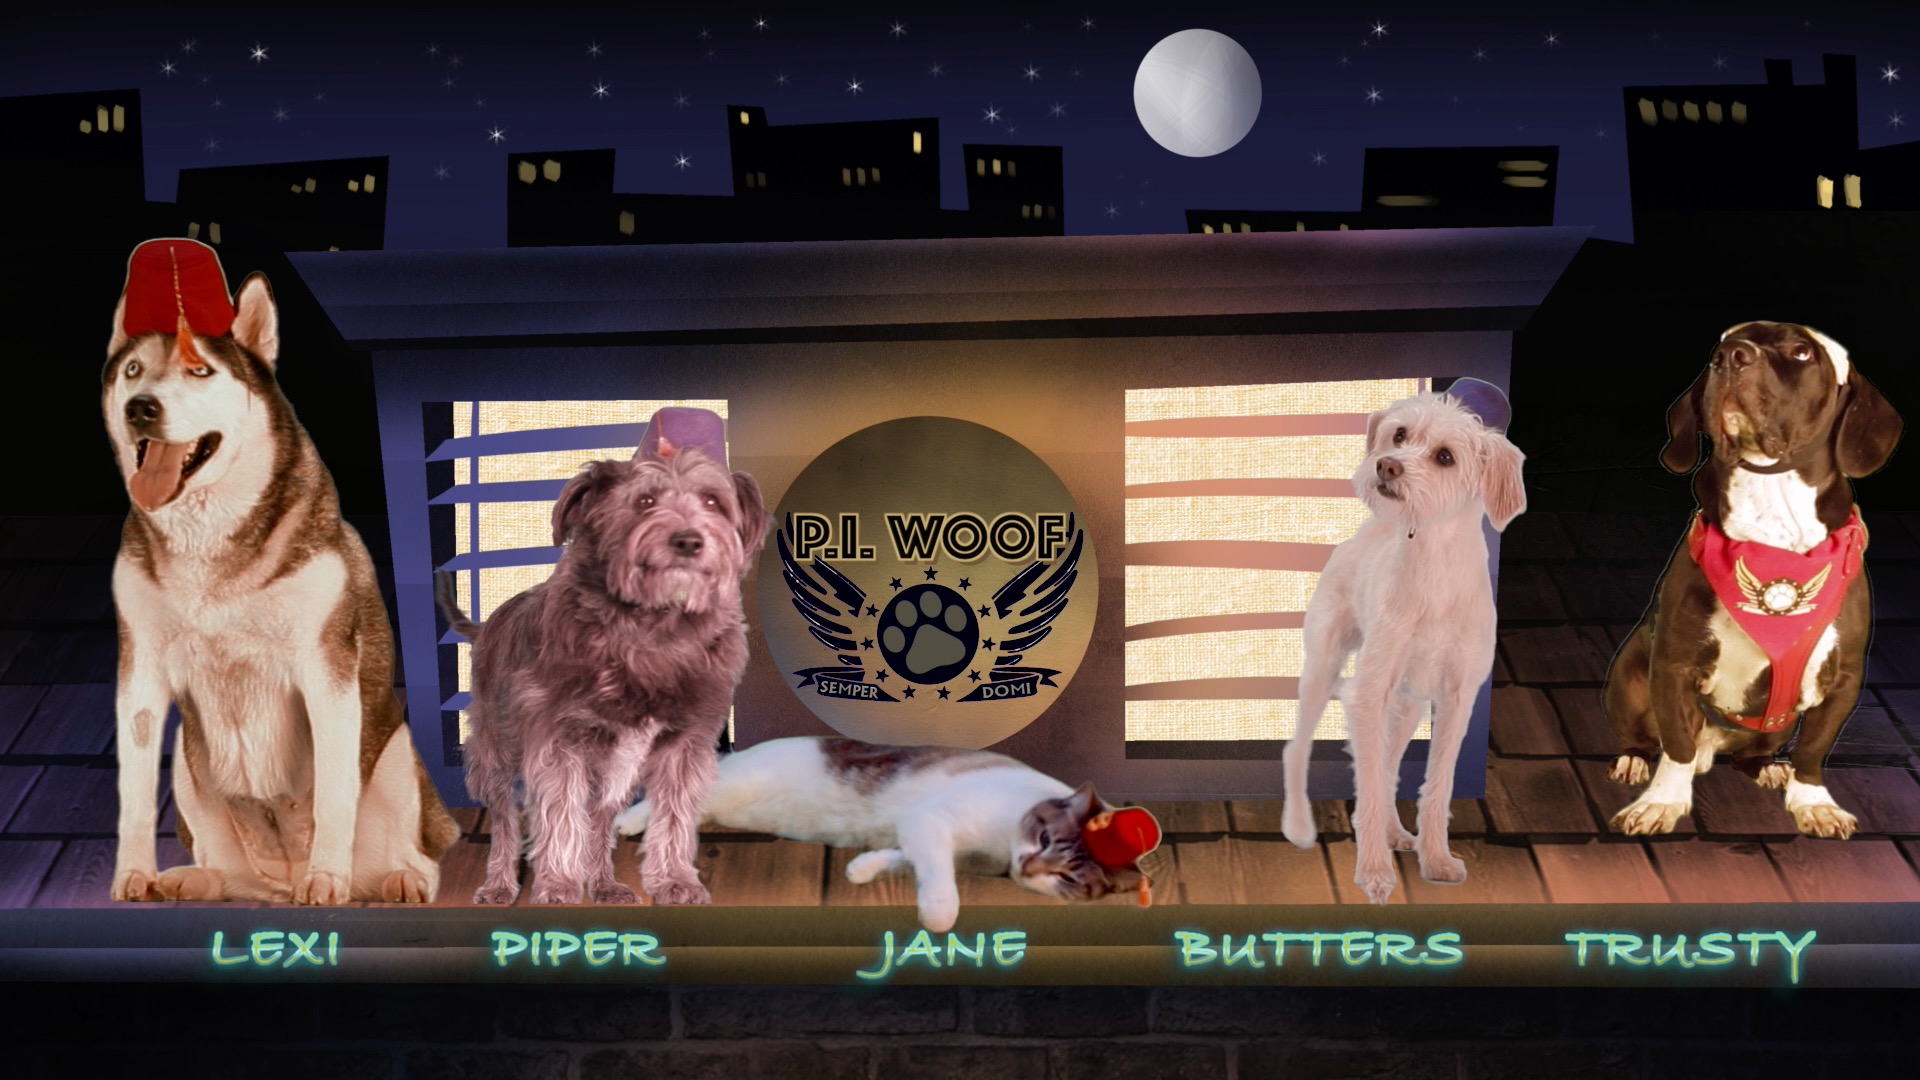 An entertaining animated film, P.I. Woof: From the Shelter to the Rescue, is worth checking out. 